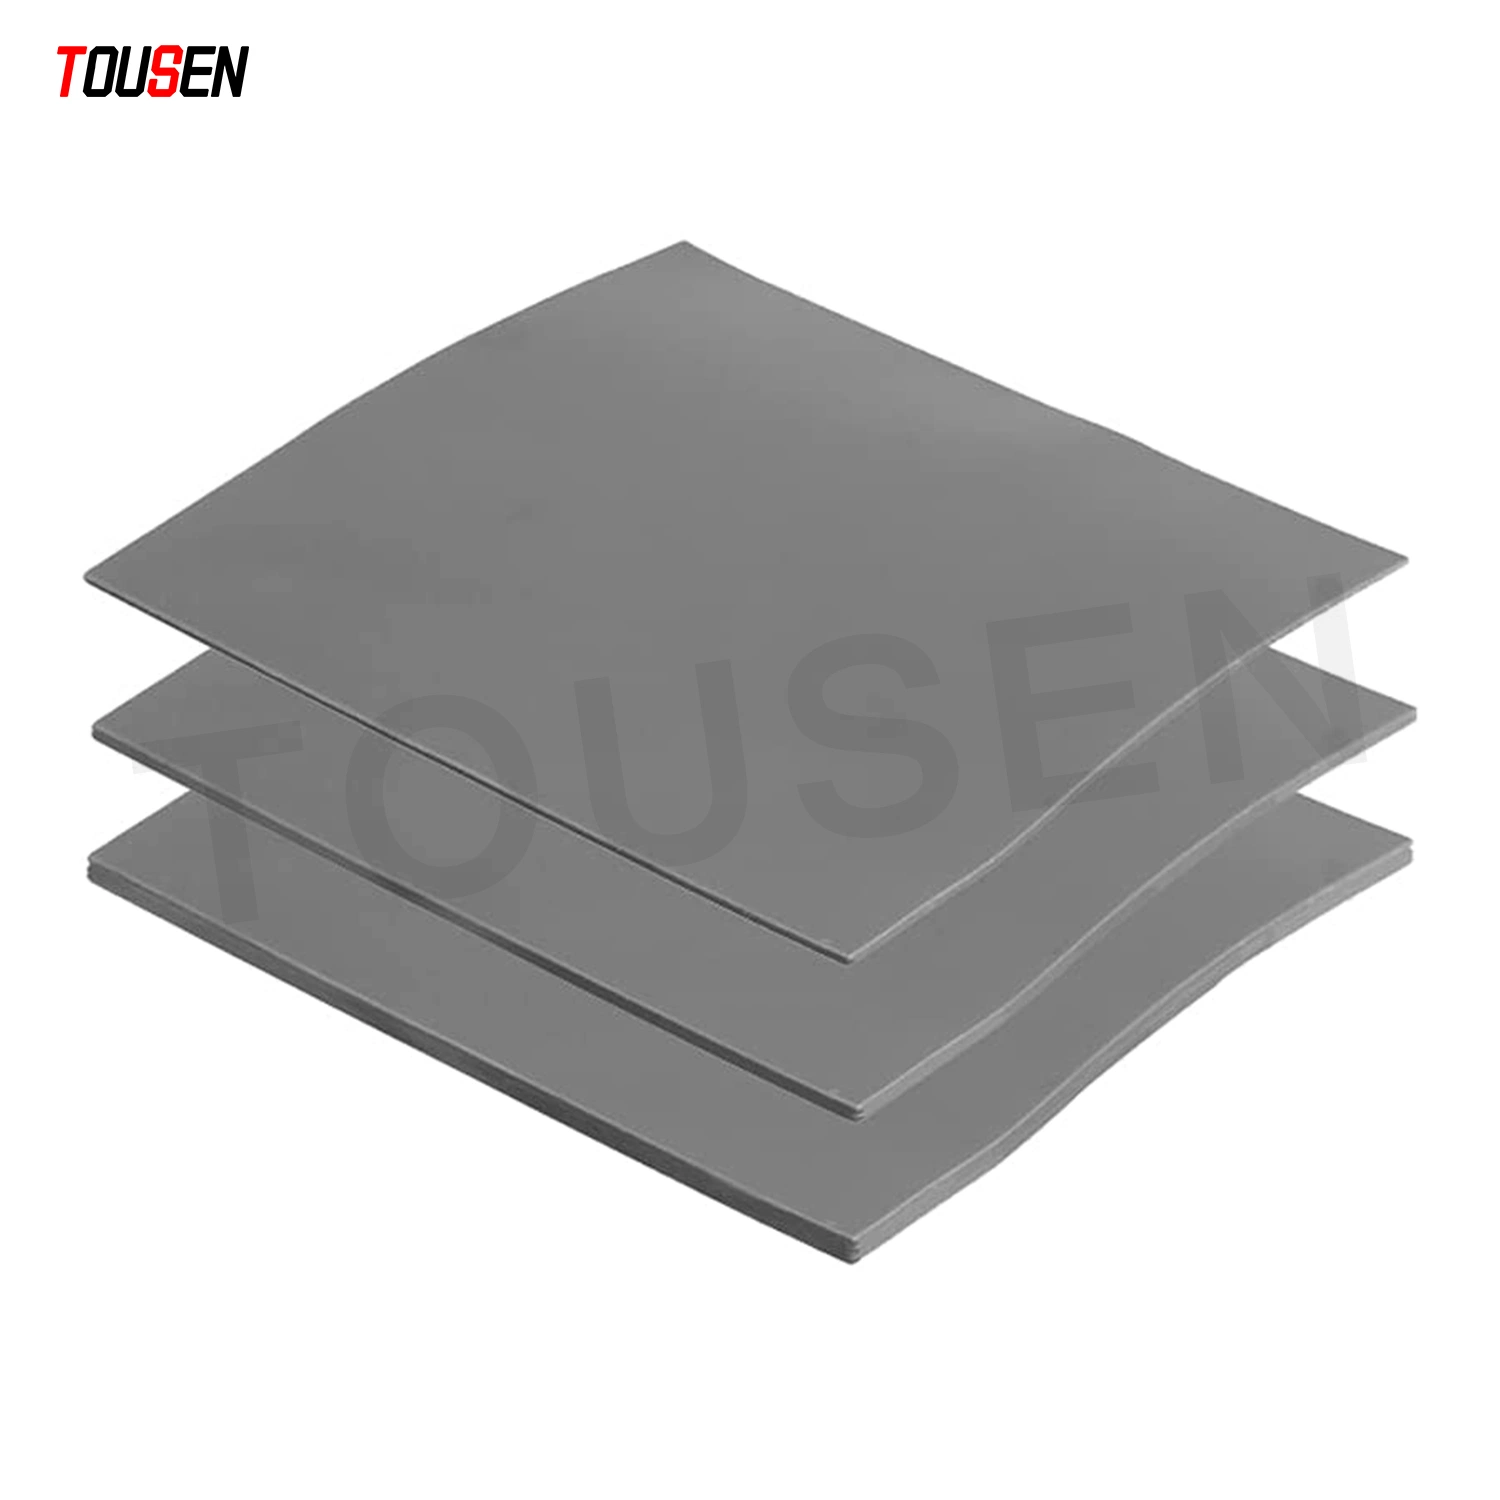 Heat Dissipation Silica Thermal Pad Gap Filler Interface Material Whole Sales Thermally Conductive Pads